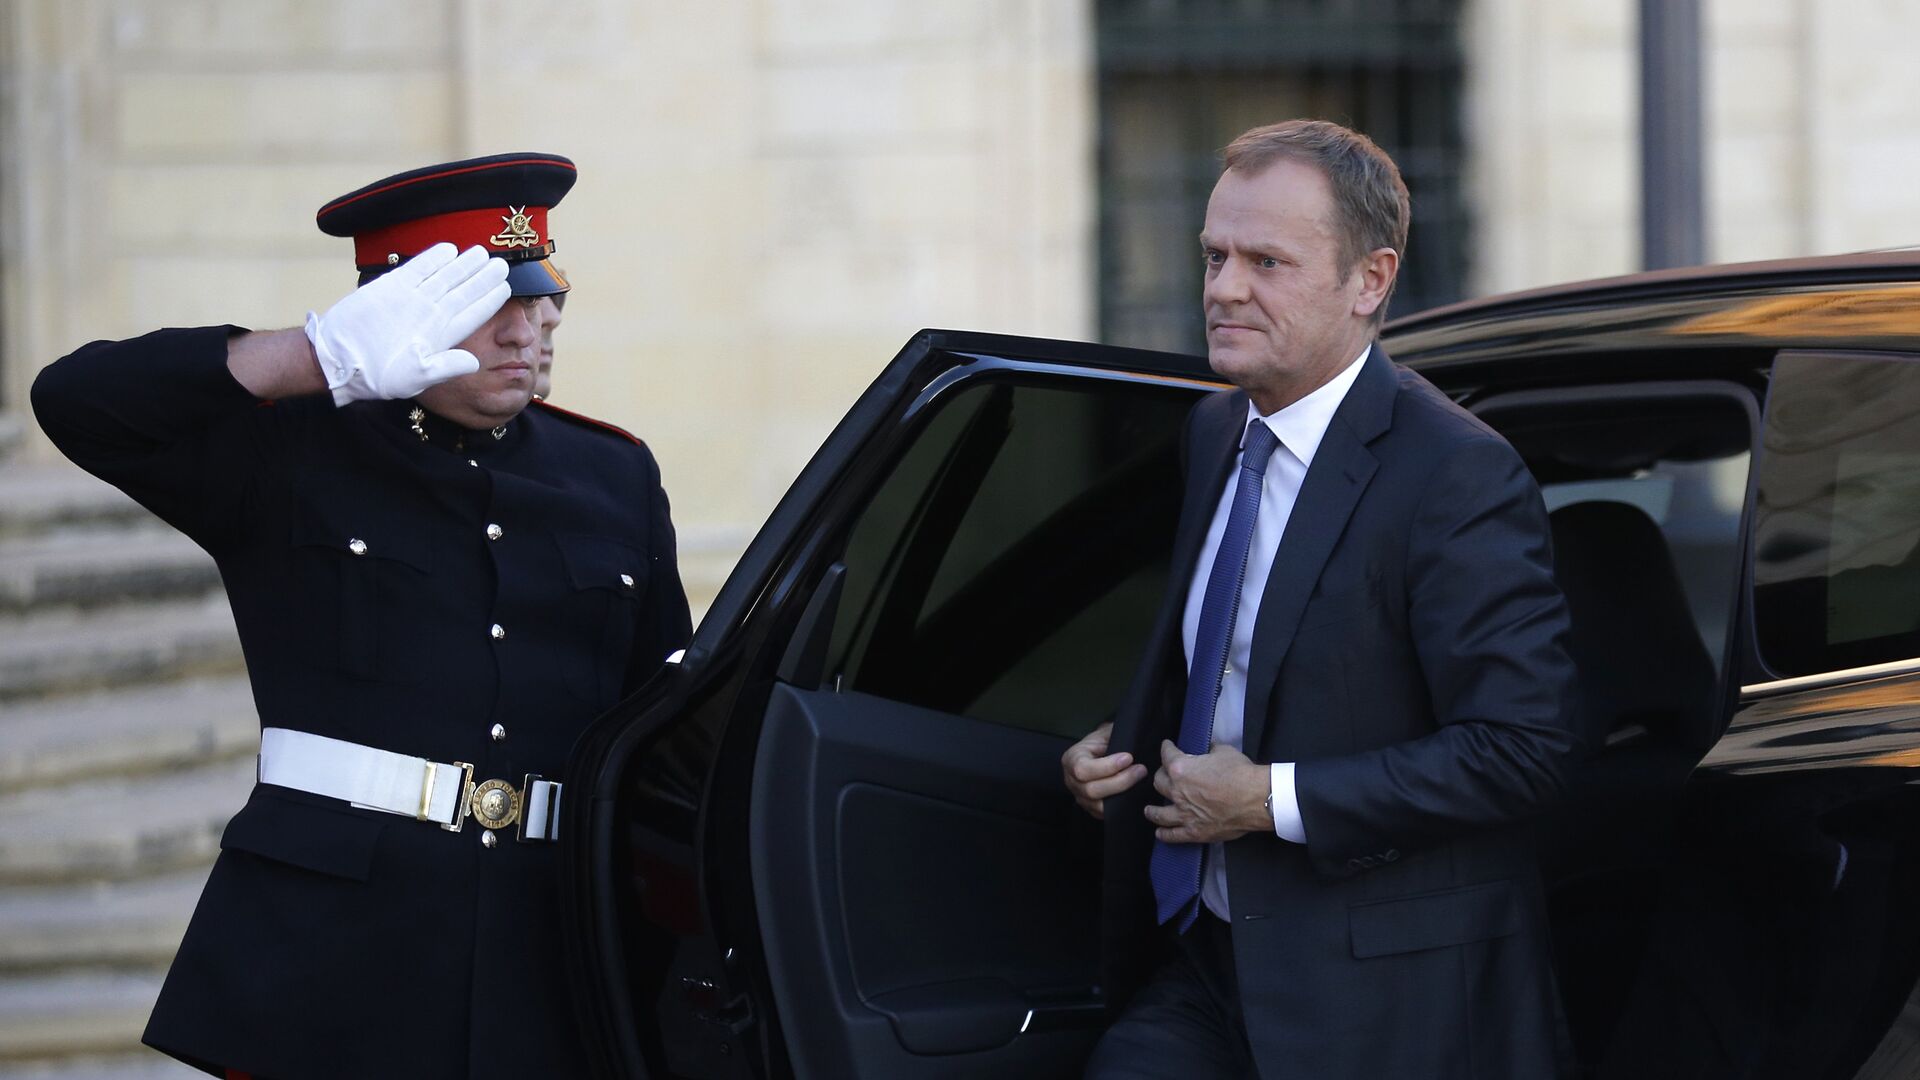 President of the European Council Donald Tusk arrives to meet Maltese Prime Minister Joseph Muscat on the occasion of a summit on migration in Valletta, Malta, Tuesday, Nov. 10, 2015. - Sputnik International, 1920, 19.01.2022